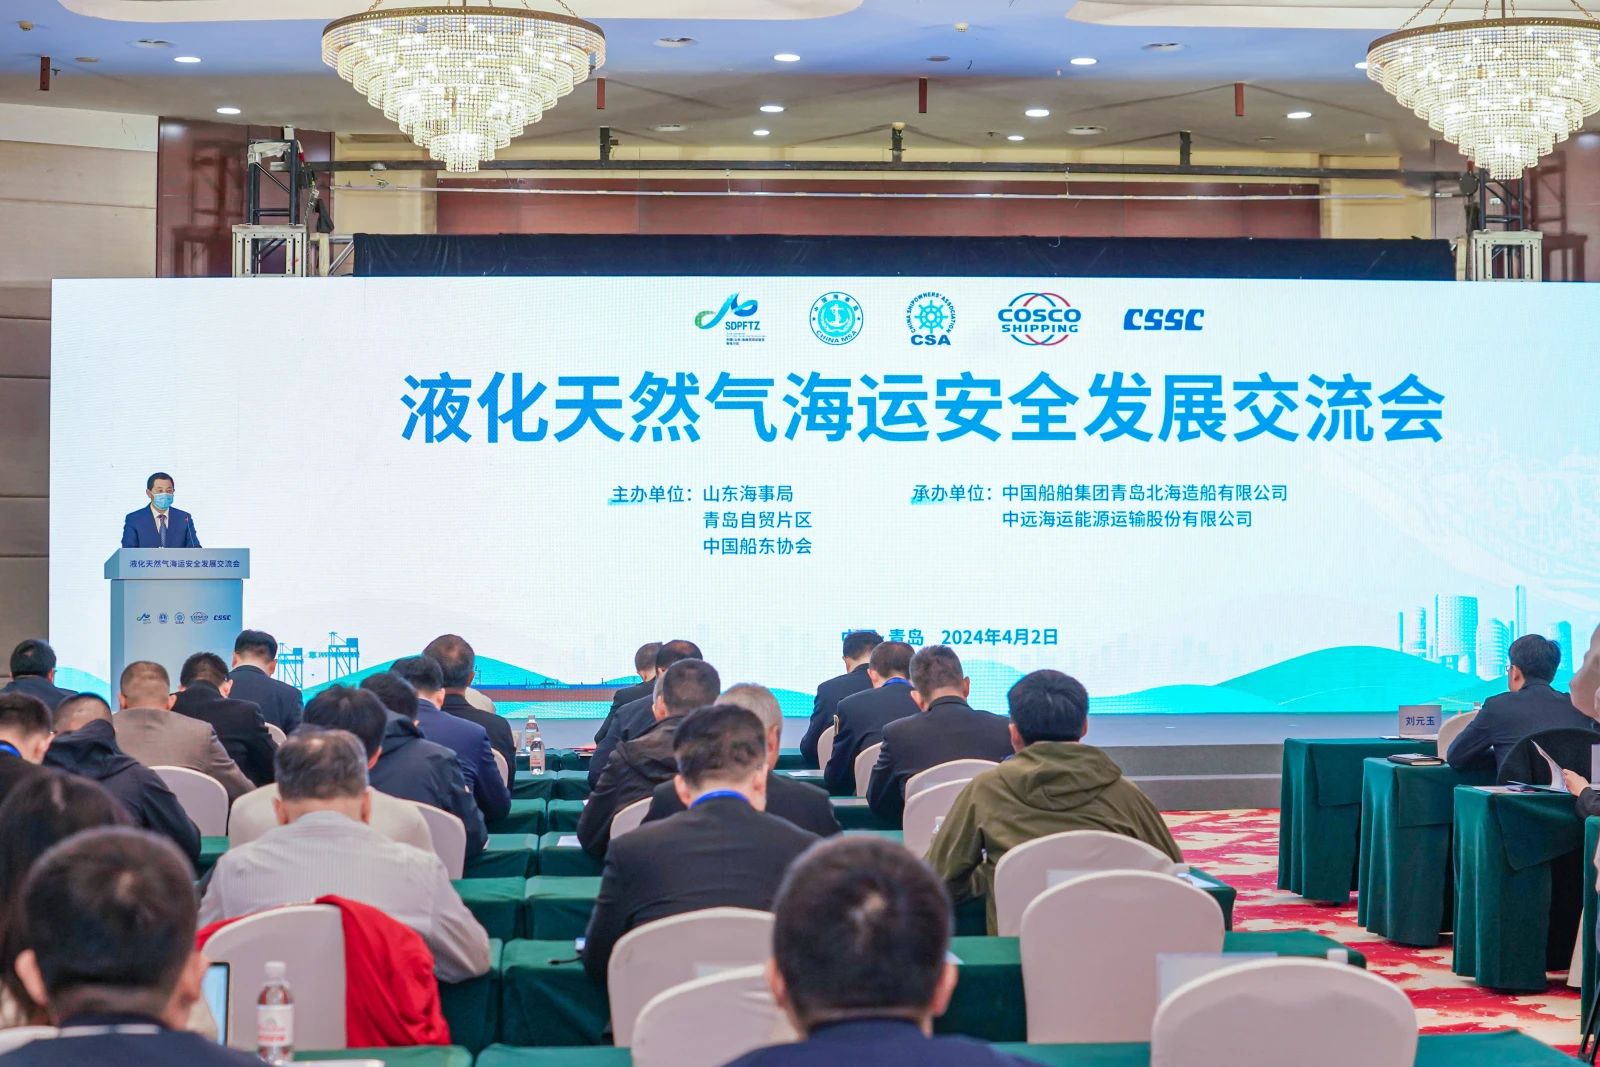 Initiatives unveiled at LNG shipping safety seminar in Qingdao